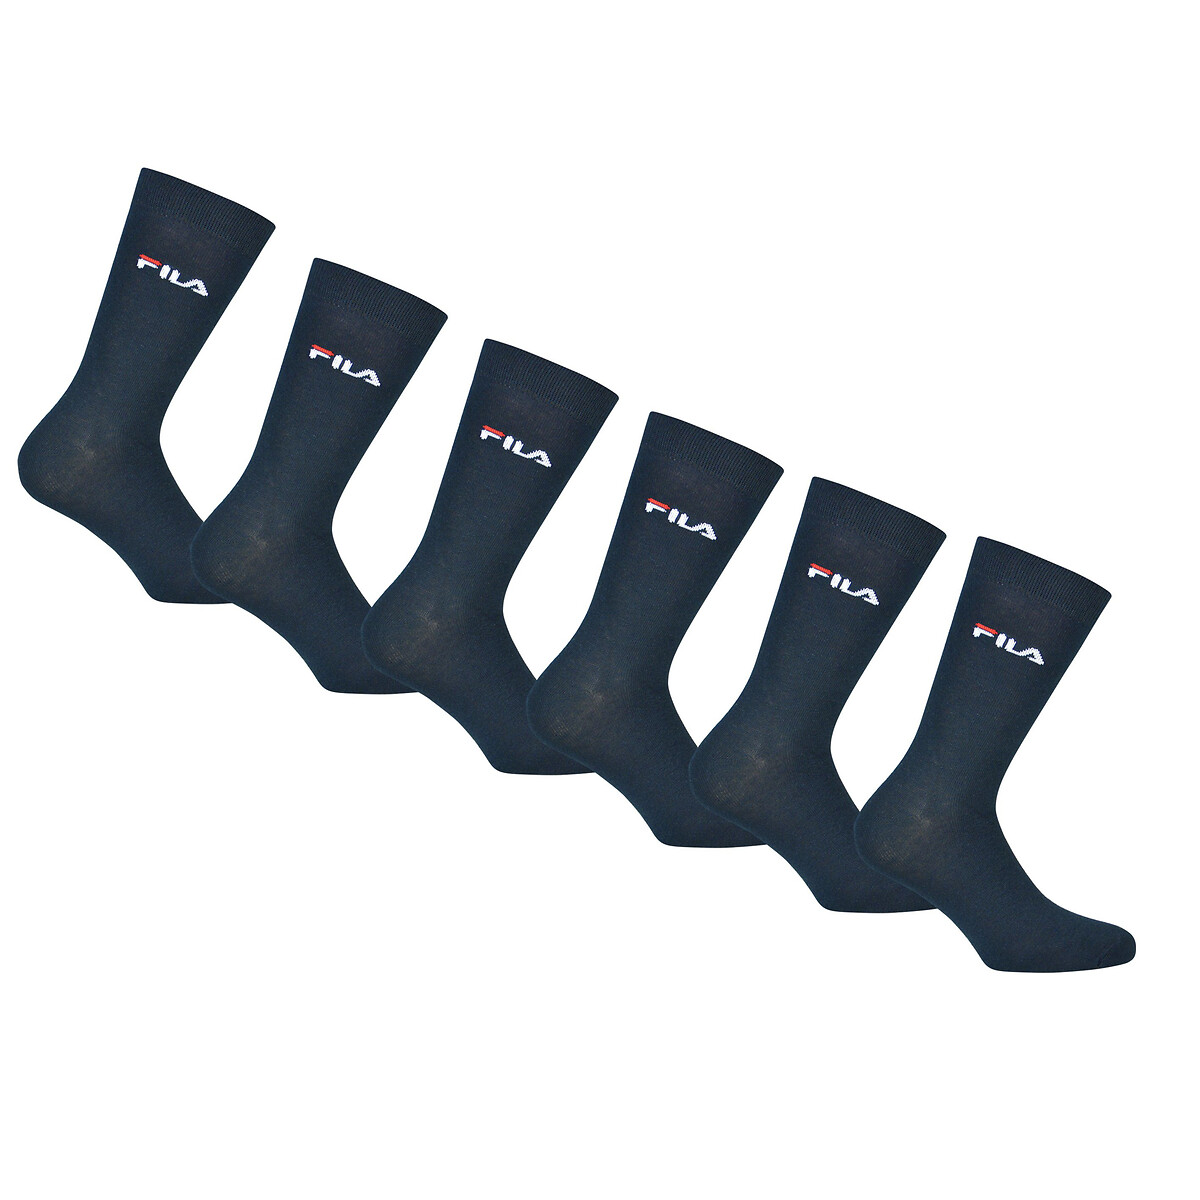 Image of Pack of 6 Pairs of Crew Socks in Cotton Mix